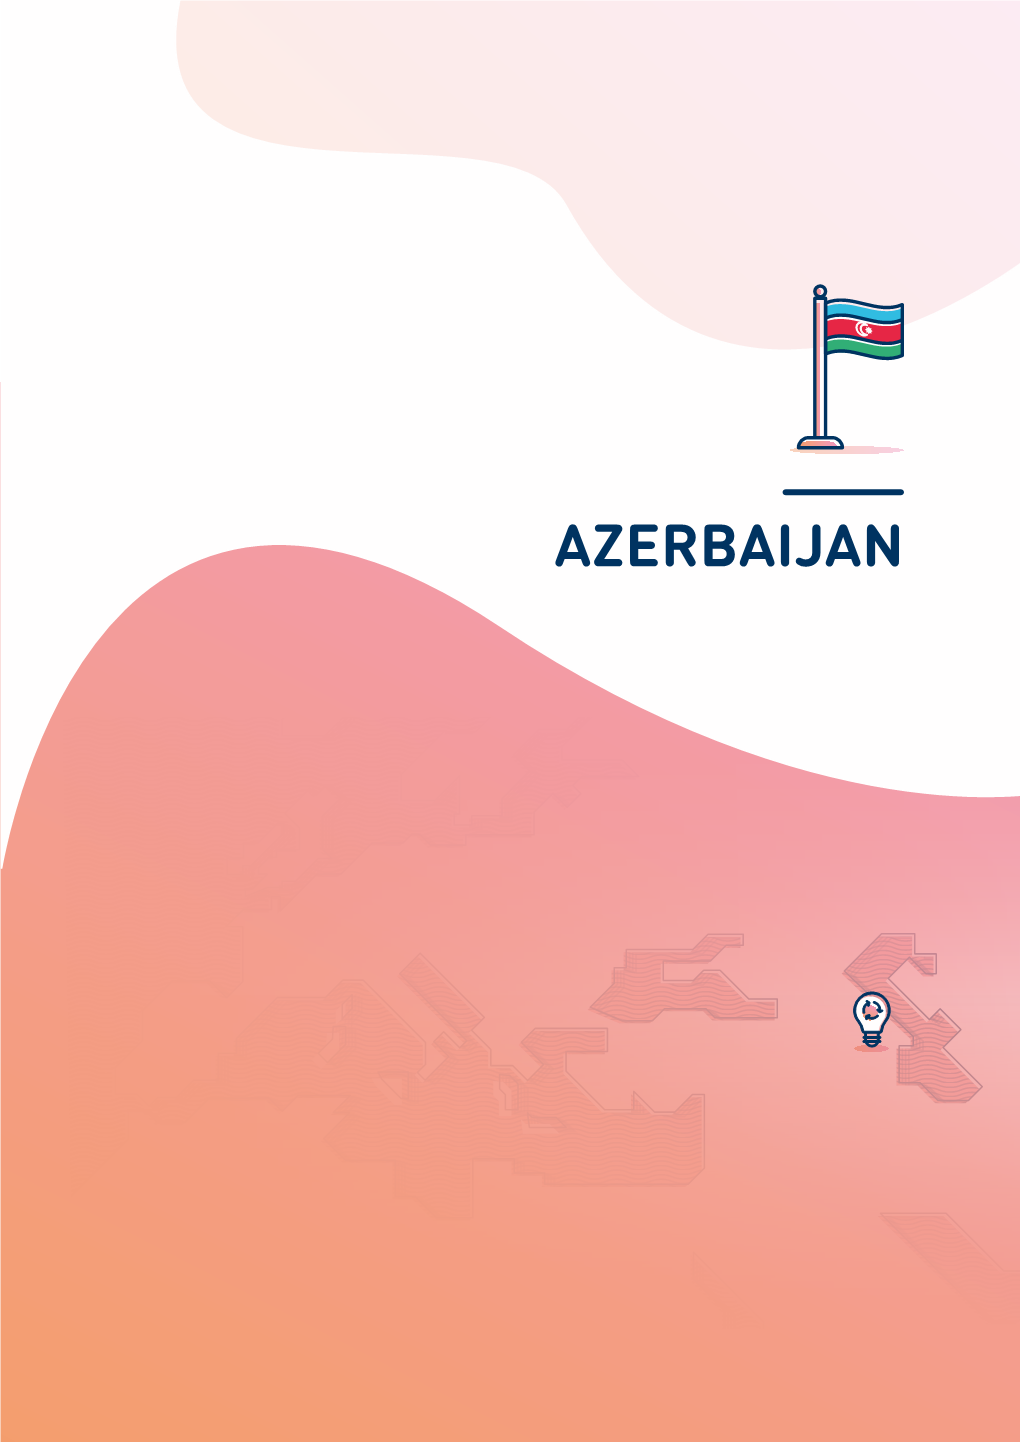 AZERBAIJAN Sub-Regional Innovation Policy Outlook 2020: Eastern Europe and the South Caucasus